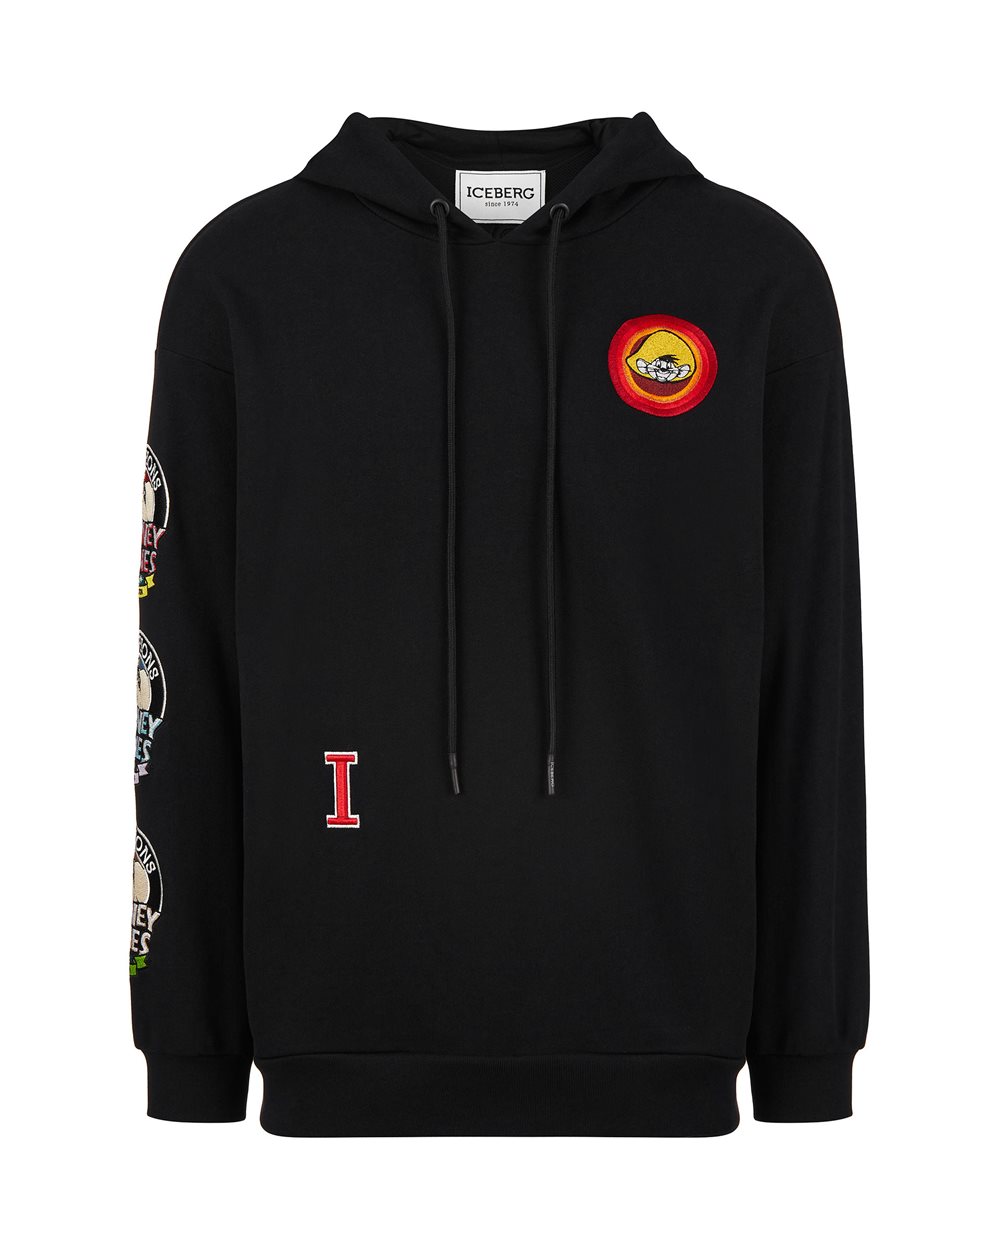 Looney | Hooded Iceberg sweatshirt Tunes patches with